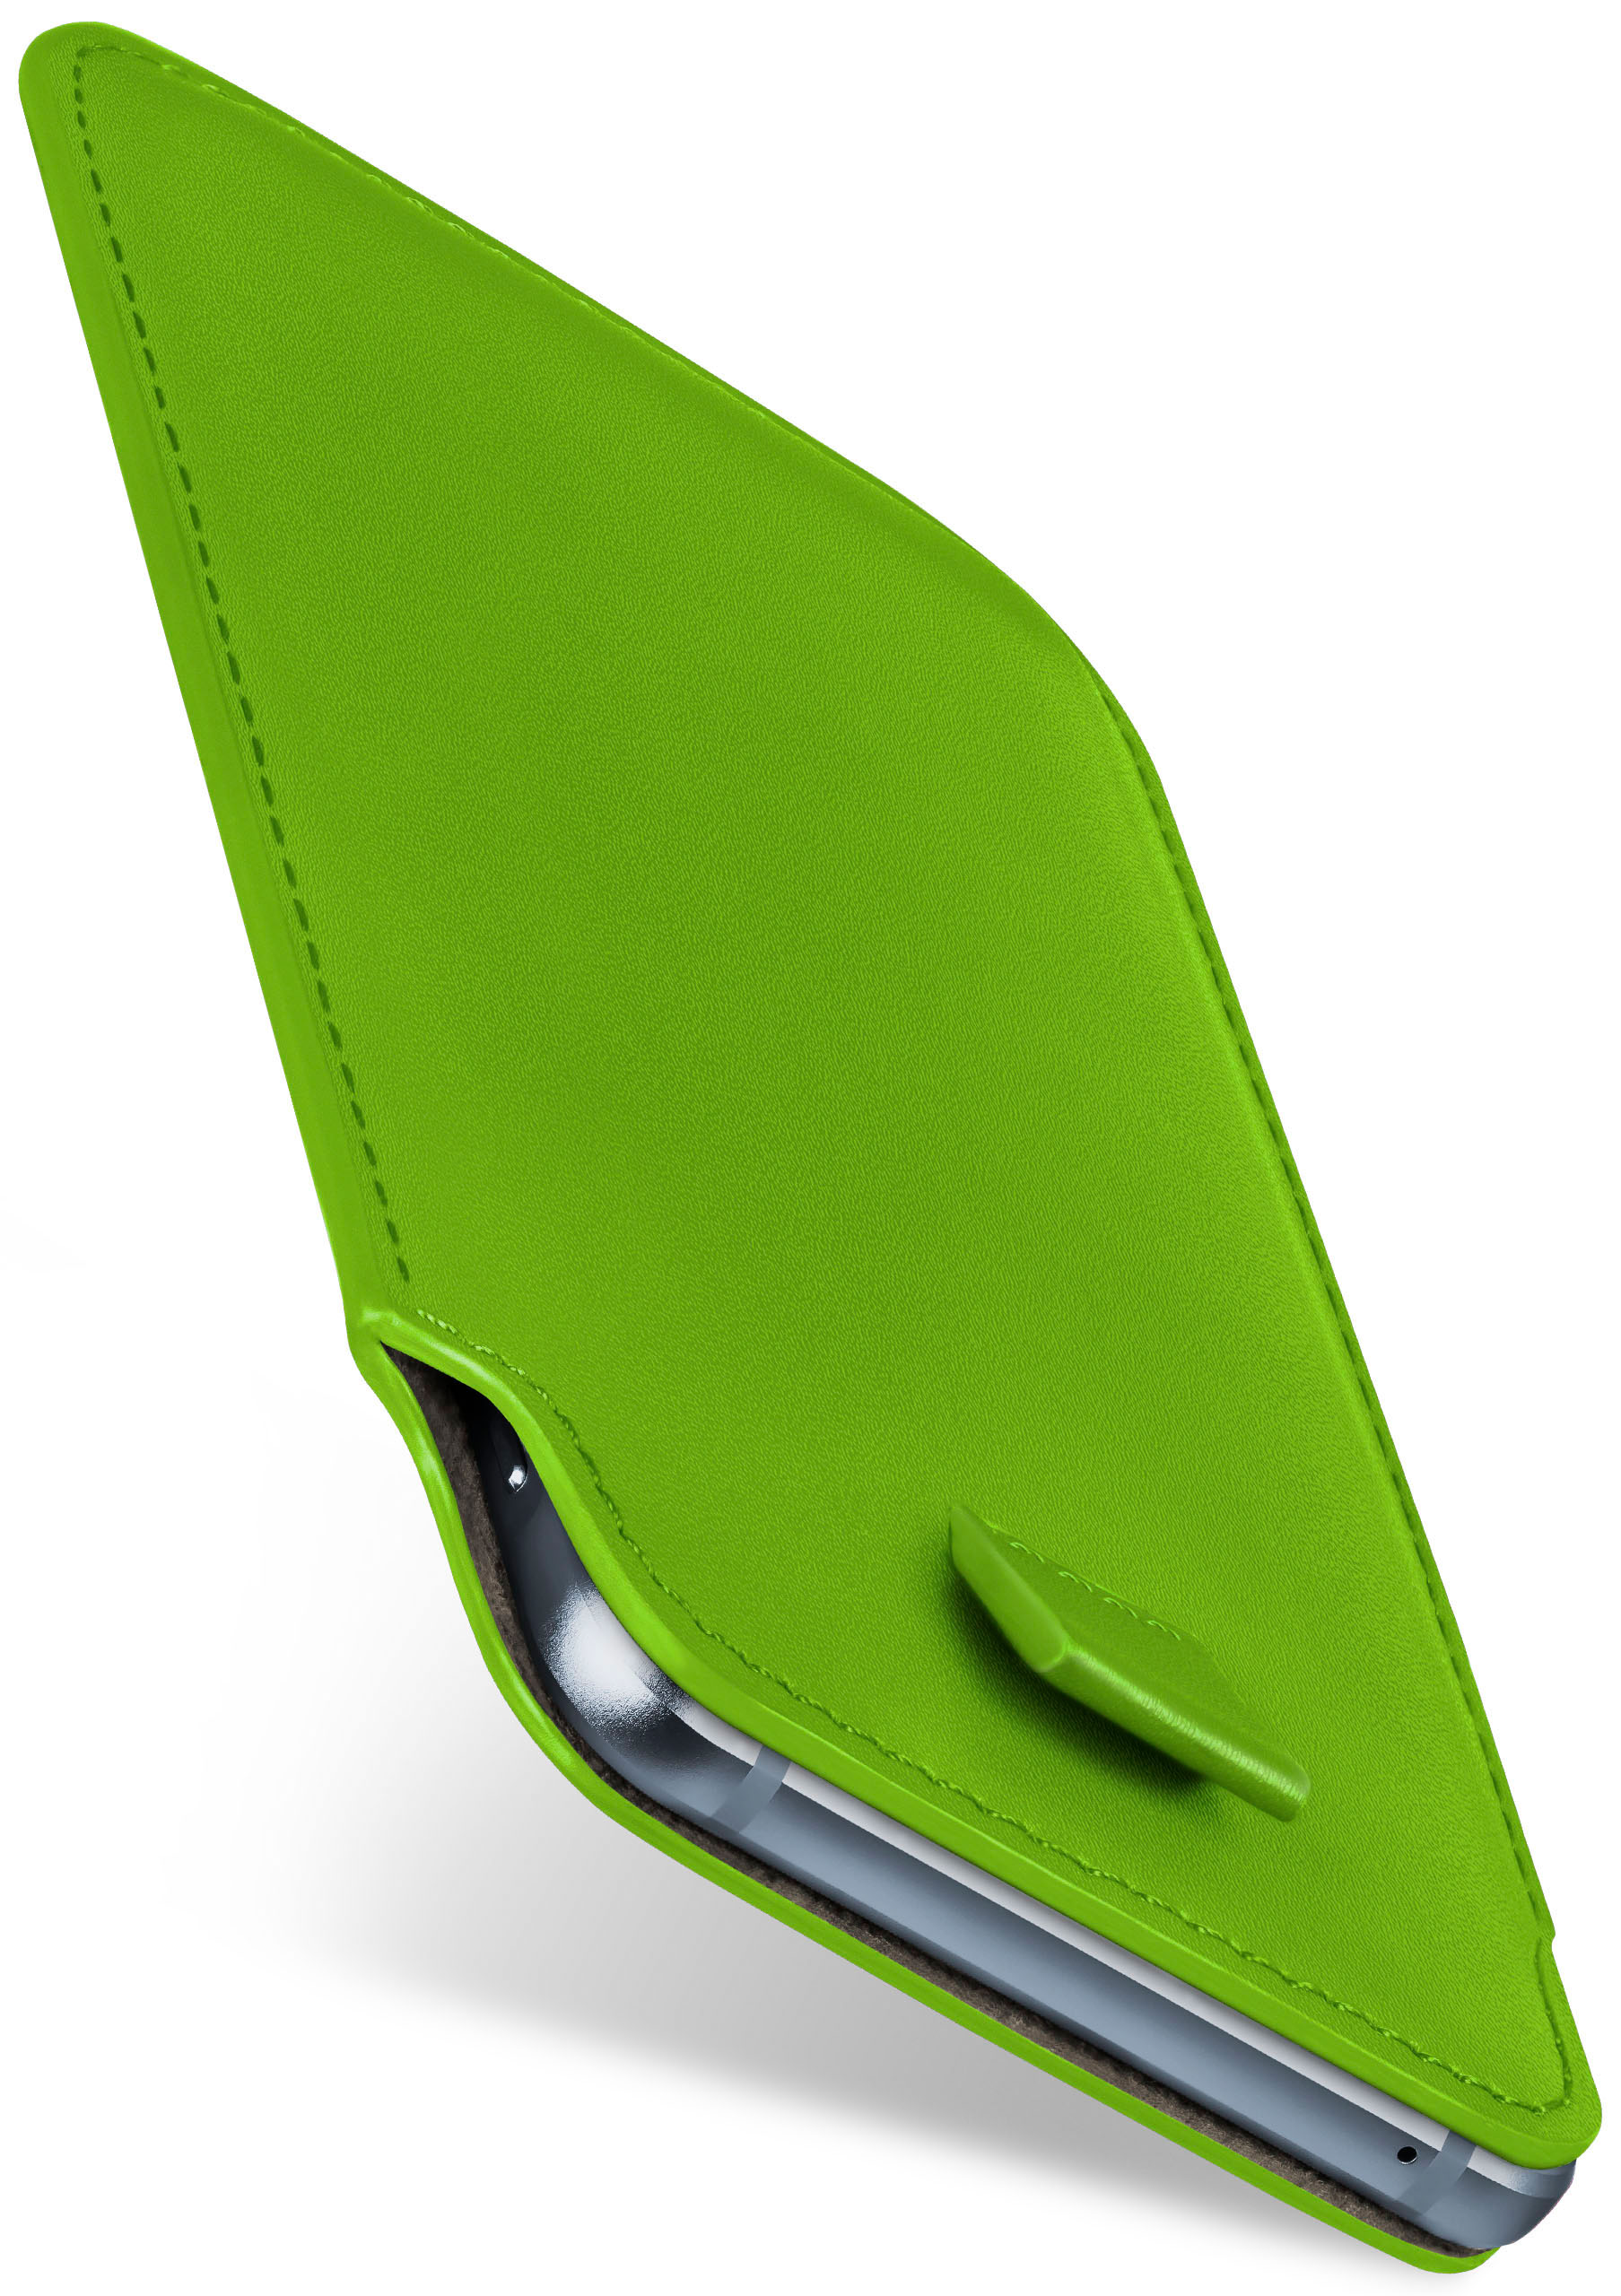 MOEX Slide Case, Full Cover, Galaxy Lime-Green S5 Neo, / S5 Samsung